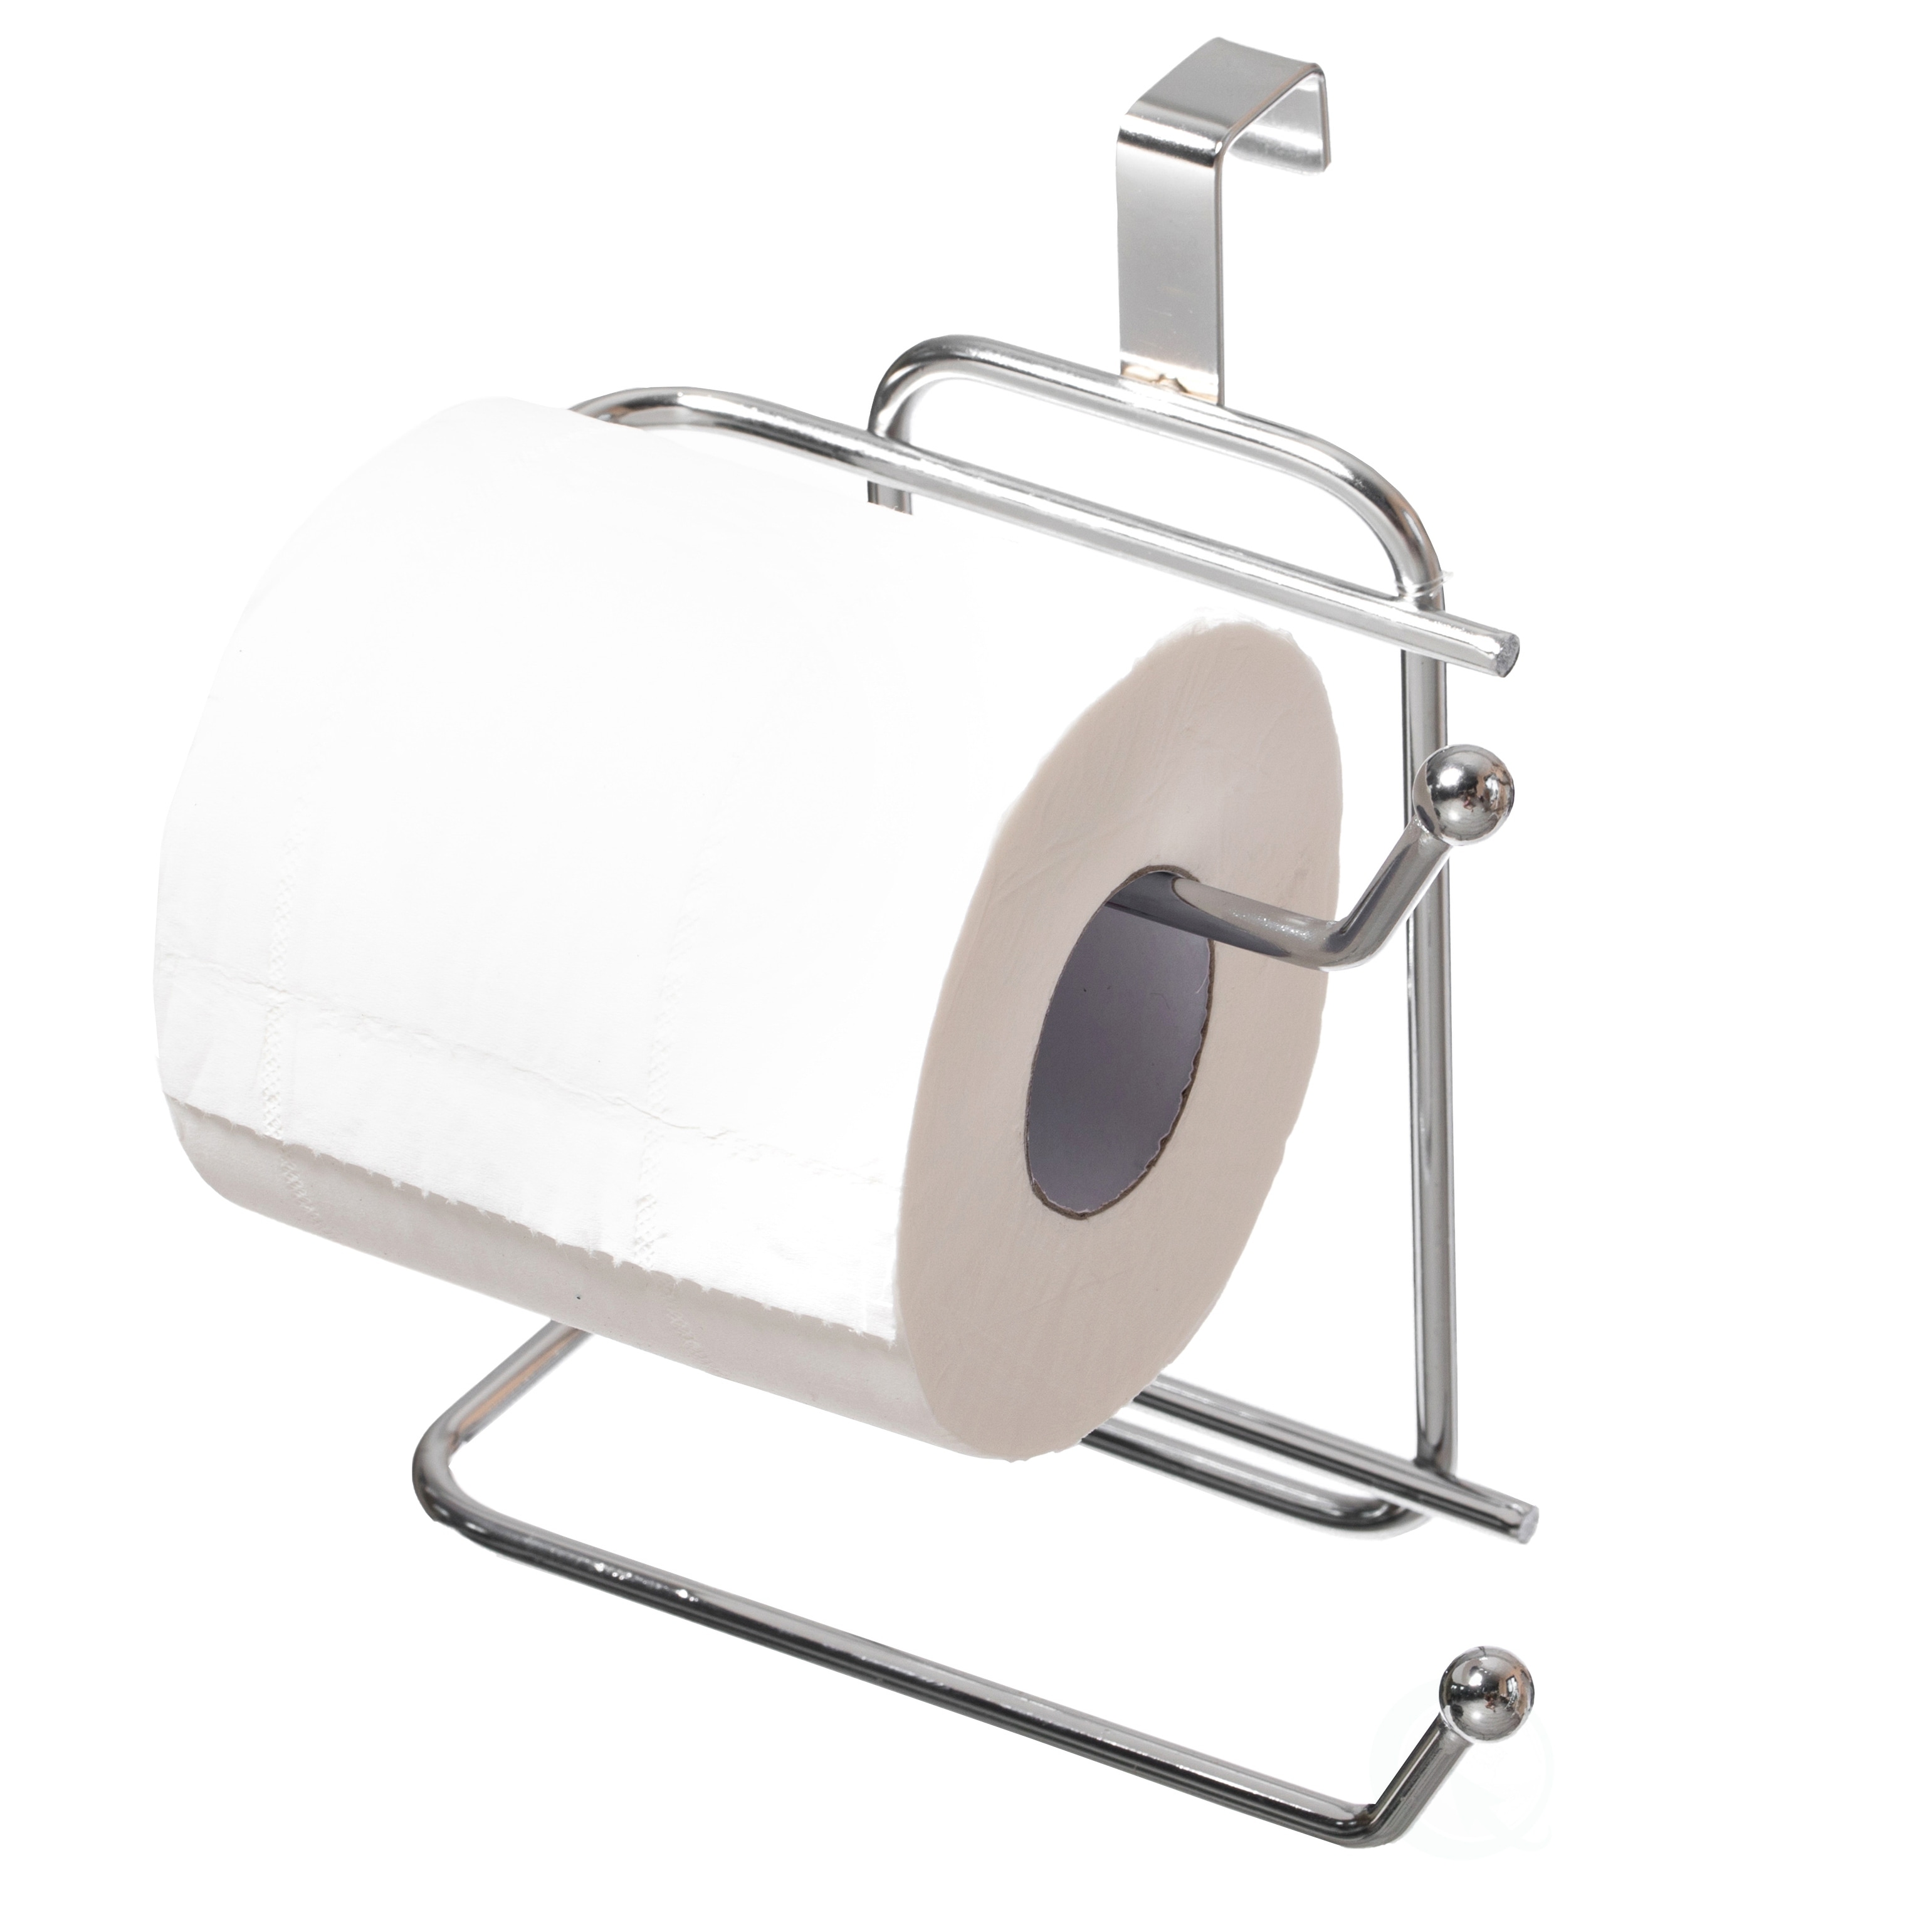 Over-the-tank toilet paper holder